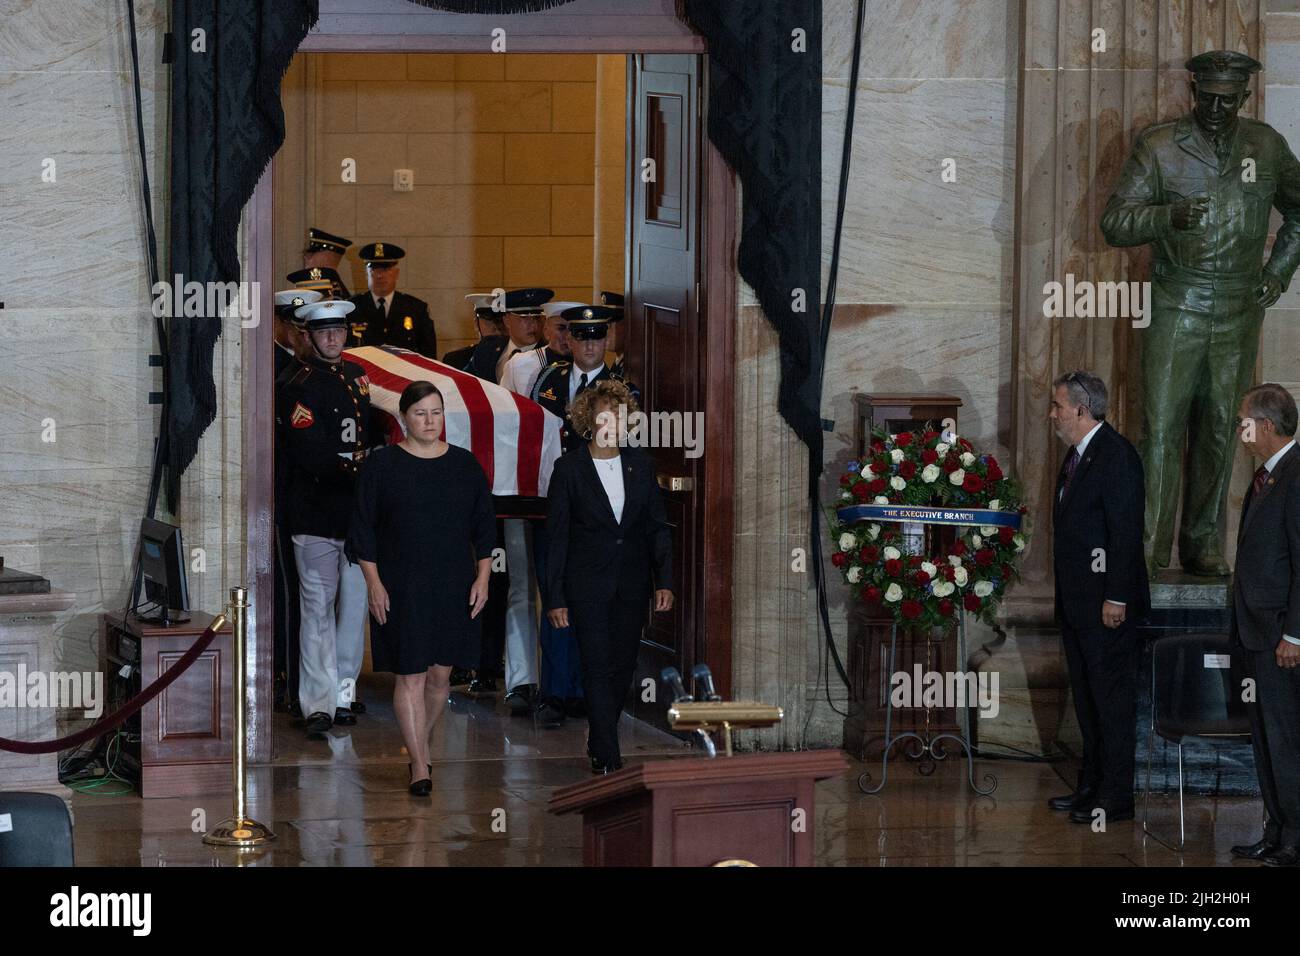 Washington DC, USA. 14th July, 2022. The casket of Marine Chief Warrant Officer 4 Hershel Woodrow “Woody” Williams, the last surviving World War II Medal of Honor recipient, is carried into the Rotunda of the US Capitol, in Washington, DC, USA, 14 July 2022. The Marine Corps veteran, who died June 29th, was awarded the nation’s highest award for his actions on Iwo Jima. Photo by ERIC LEE/Pool/ABACAPRESS.COM Credit: Abaca Press/Alamy Live News Stock Photo